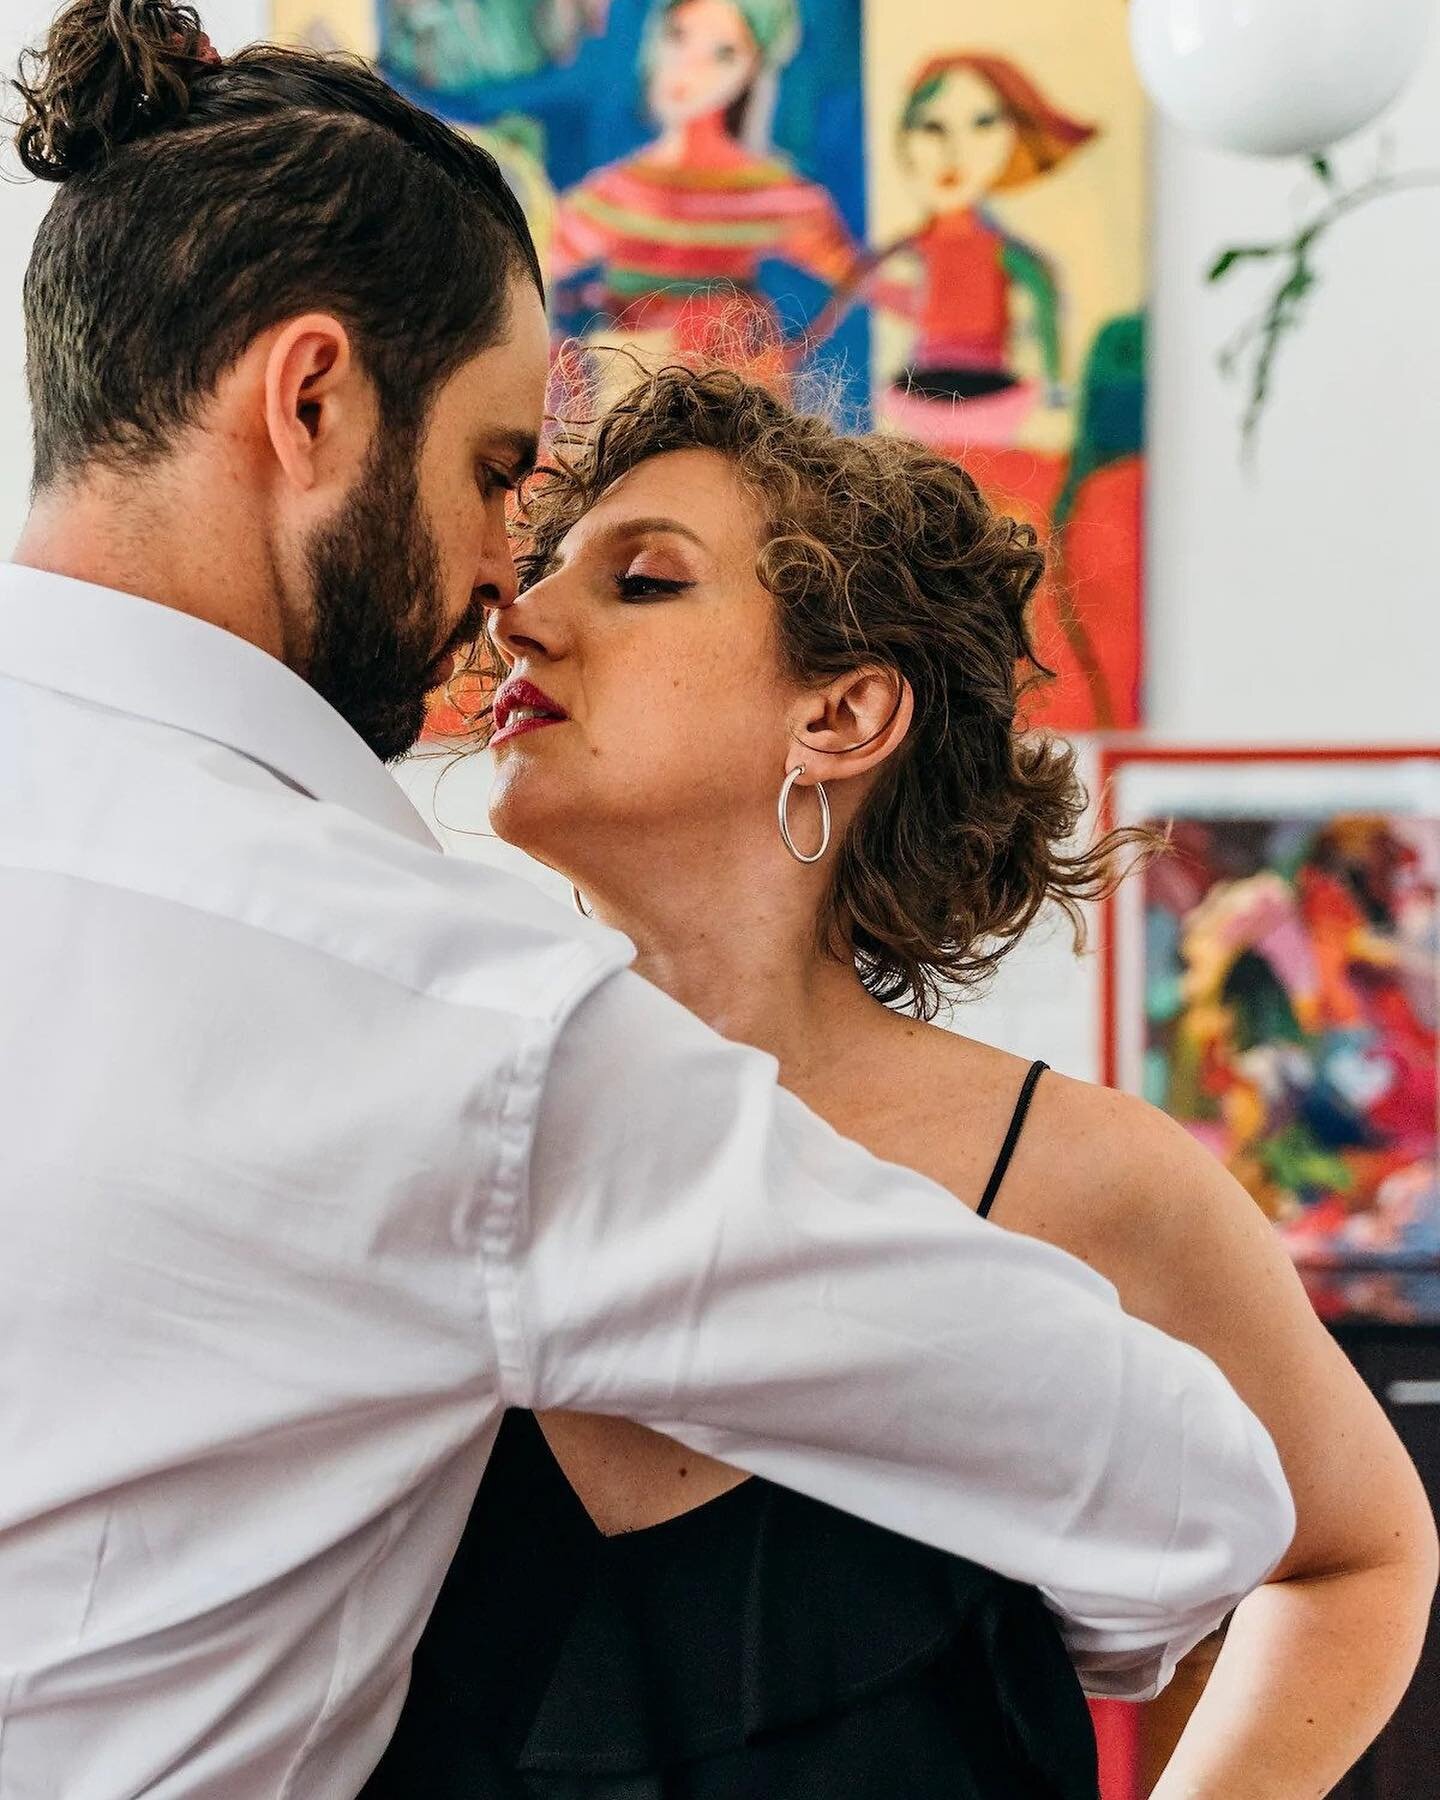 Summer Friday Night Activity: why not try a Tango Intro ⁠⁠?
⁠⁠
You&rsquo;ll need a partner for this experience. The teachers like to keep this class intimate by only allowing three couples (six people total) to be coached to more efficiently help cor